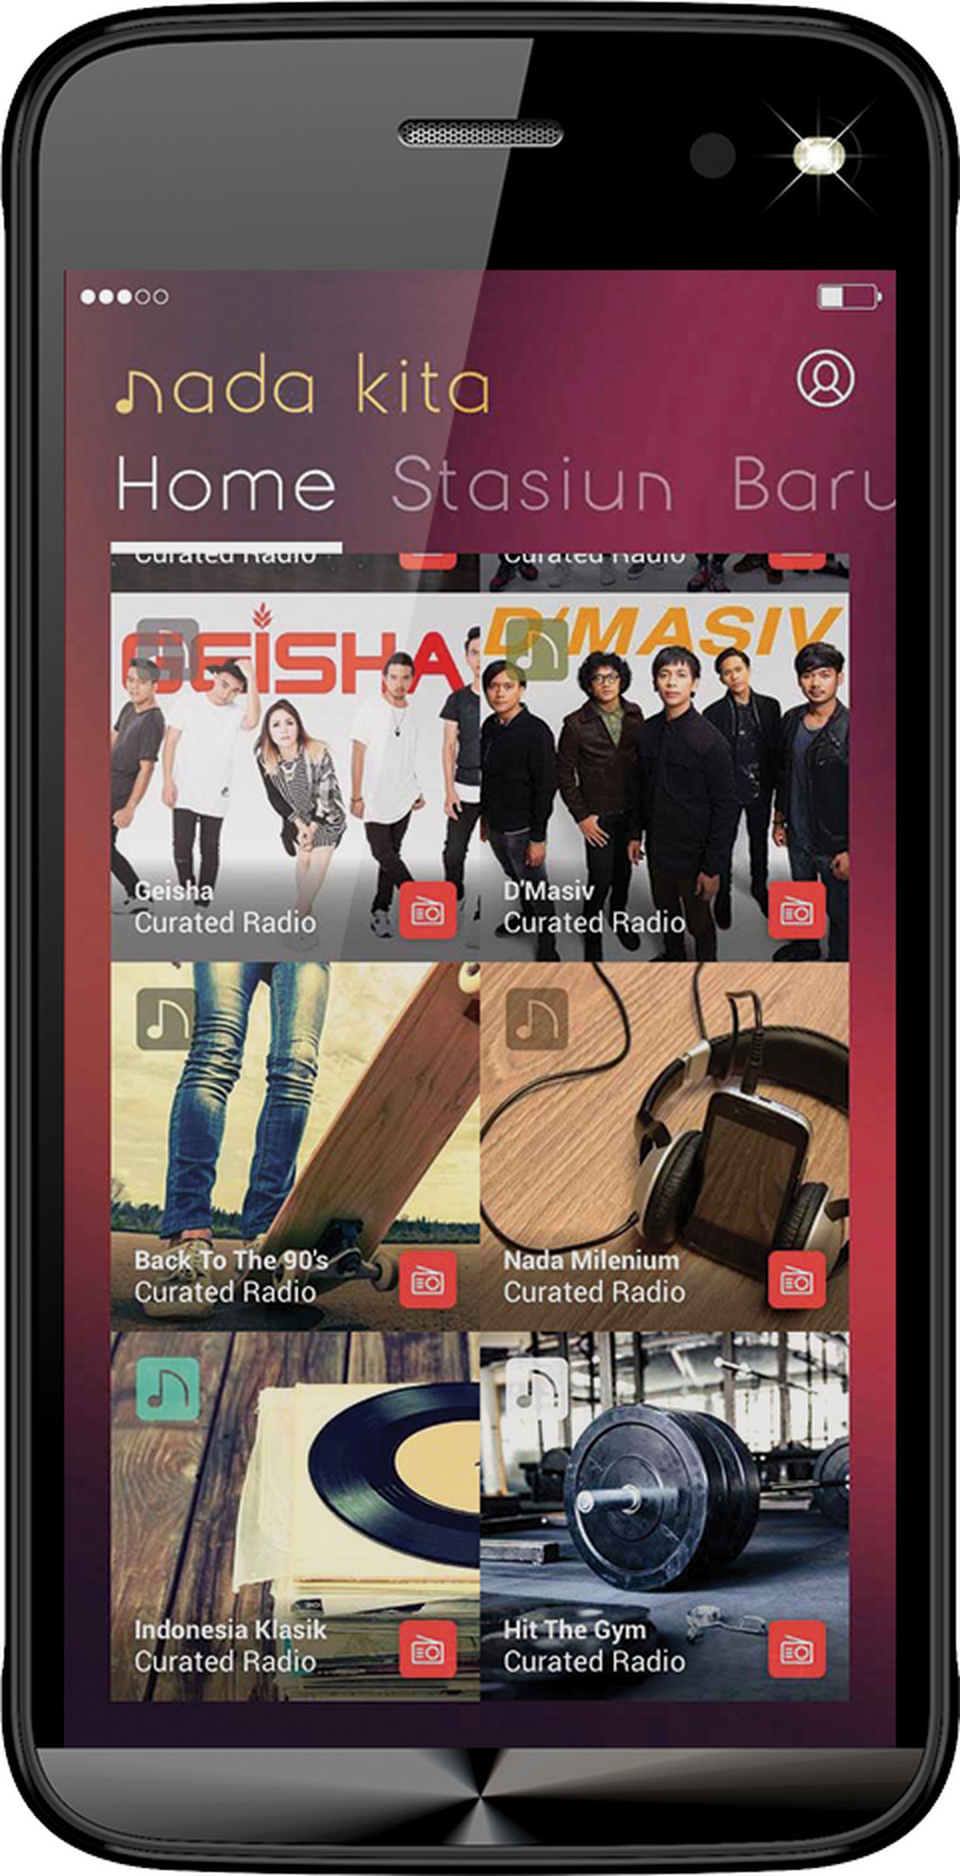 The app features music from artists across the country. (Photo courtesy of Nada Kita)